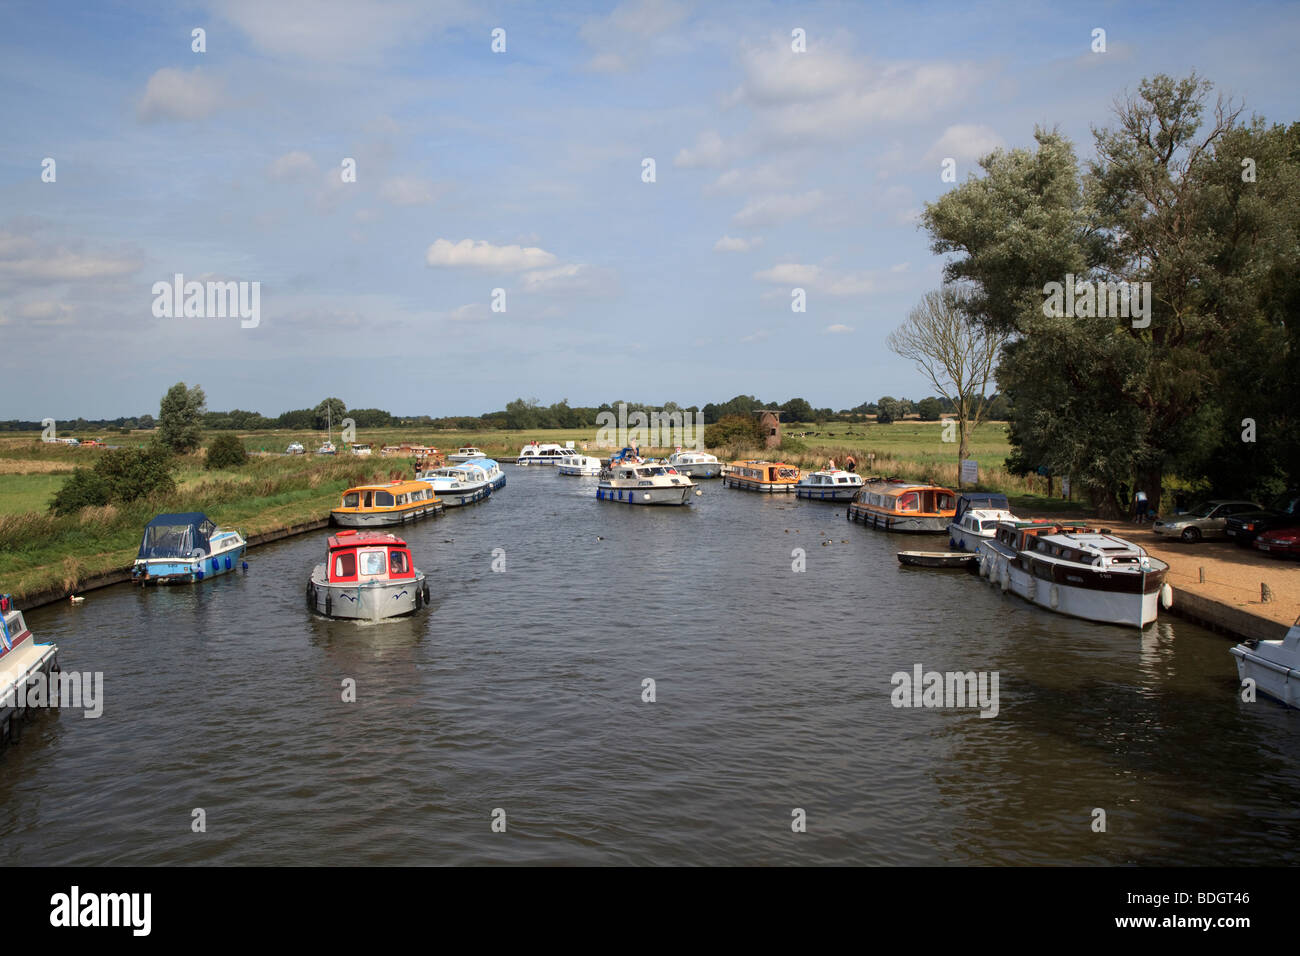 Boats on the river Ant at Ludham Bridge, Norfolk England Stock Photo